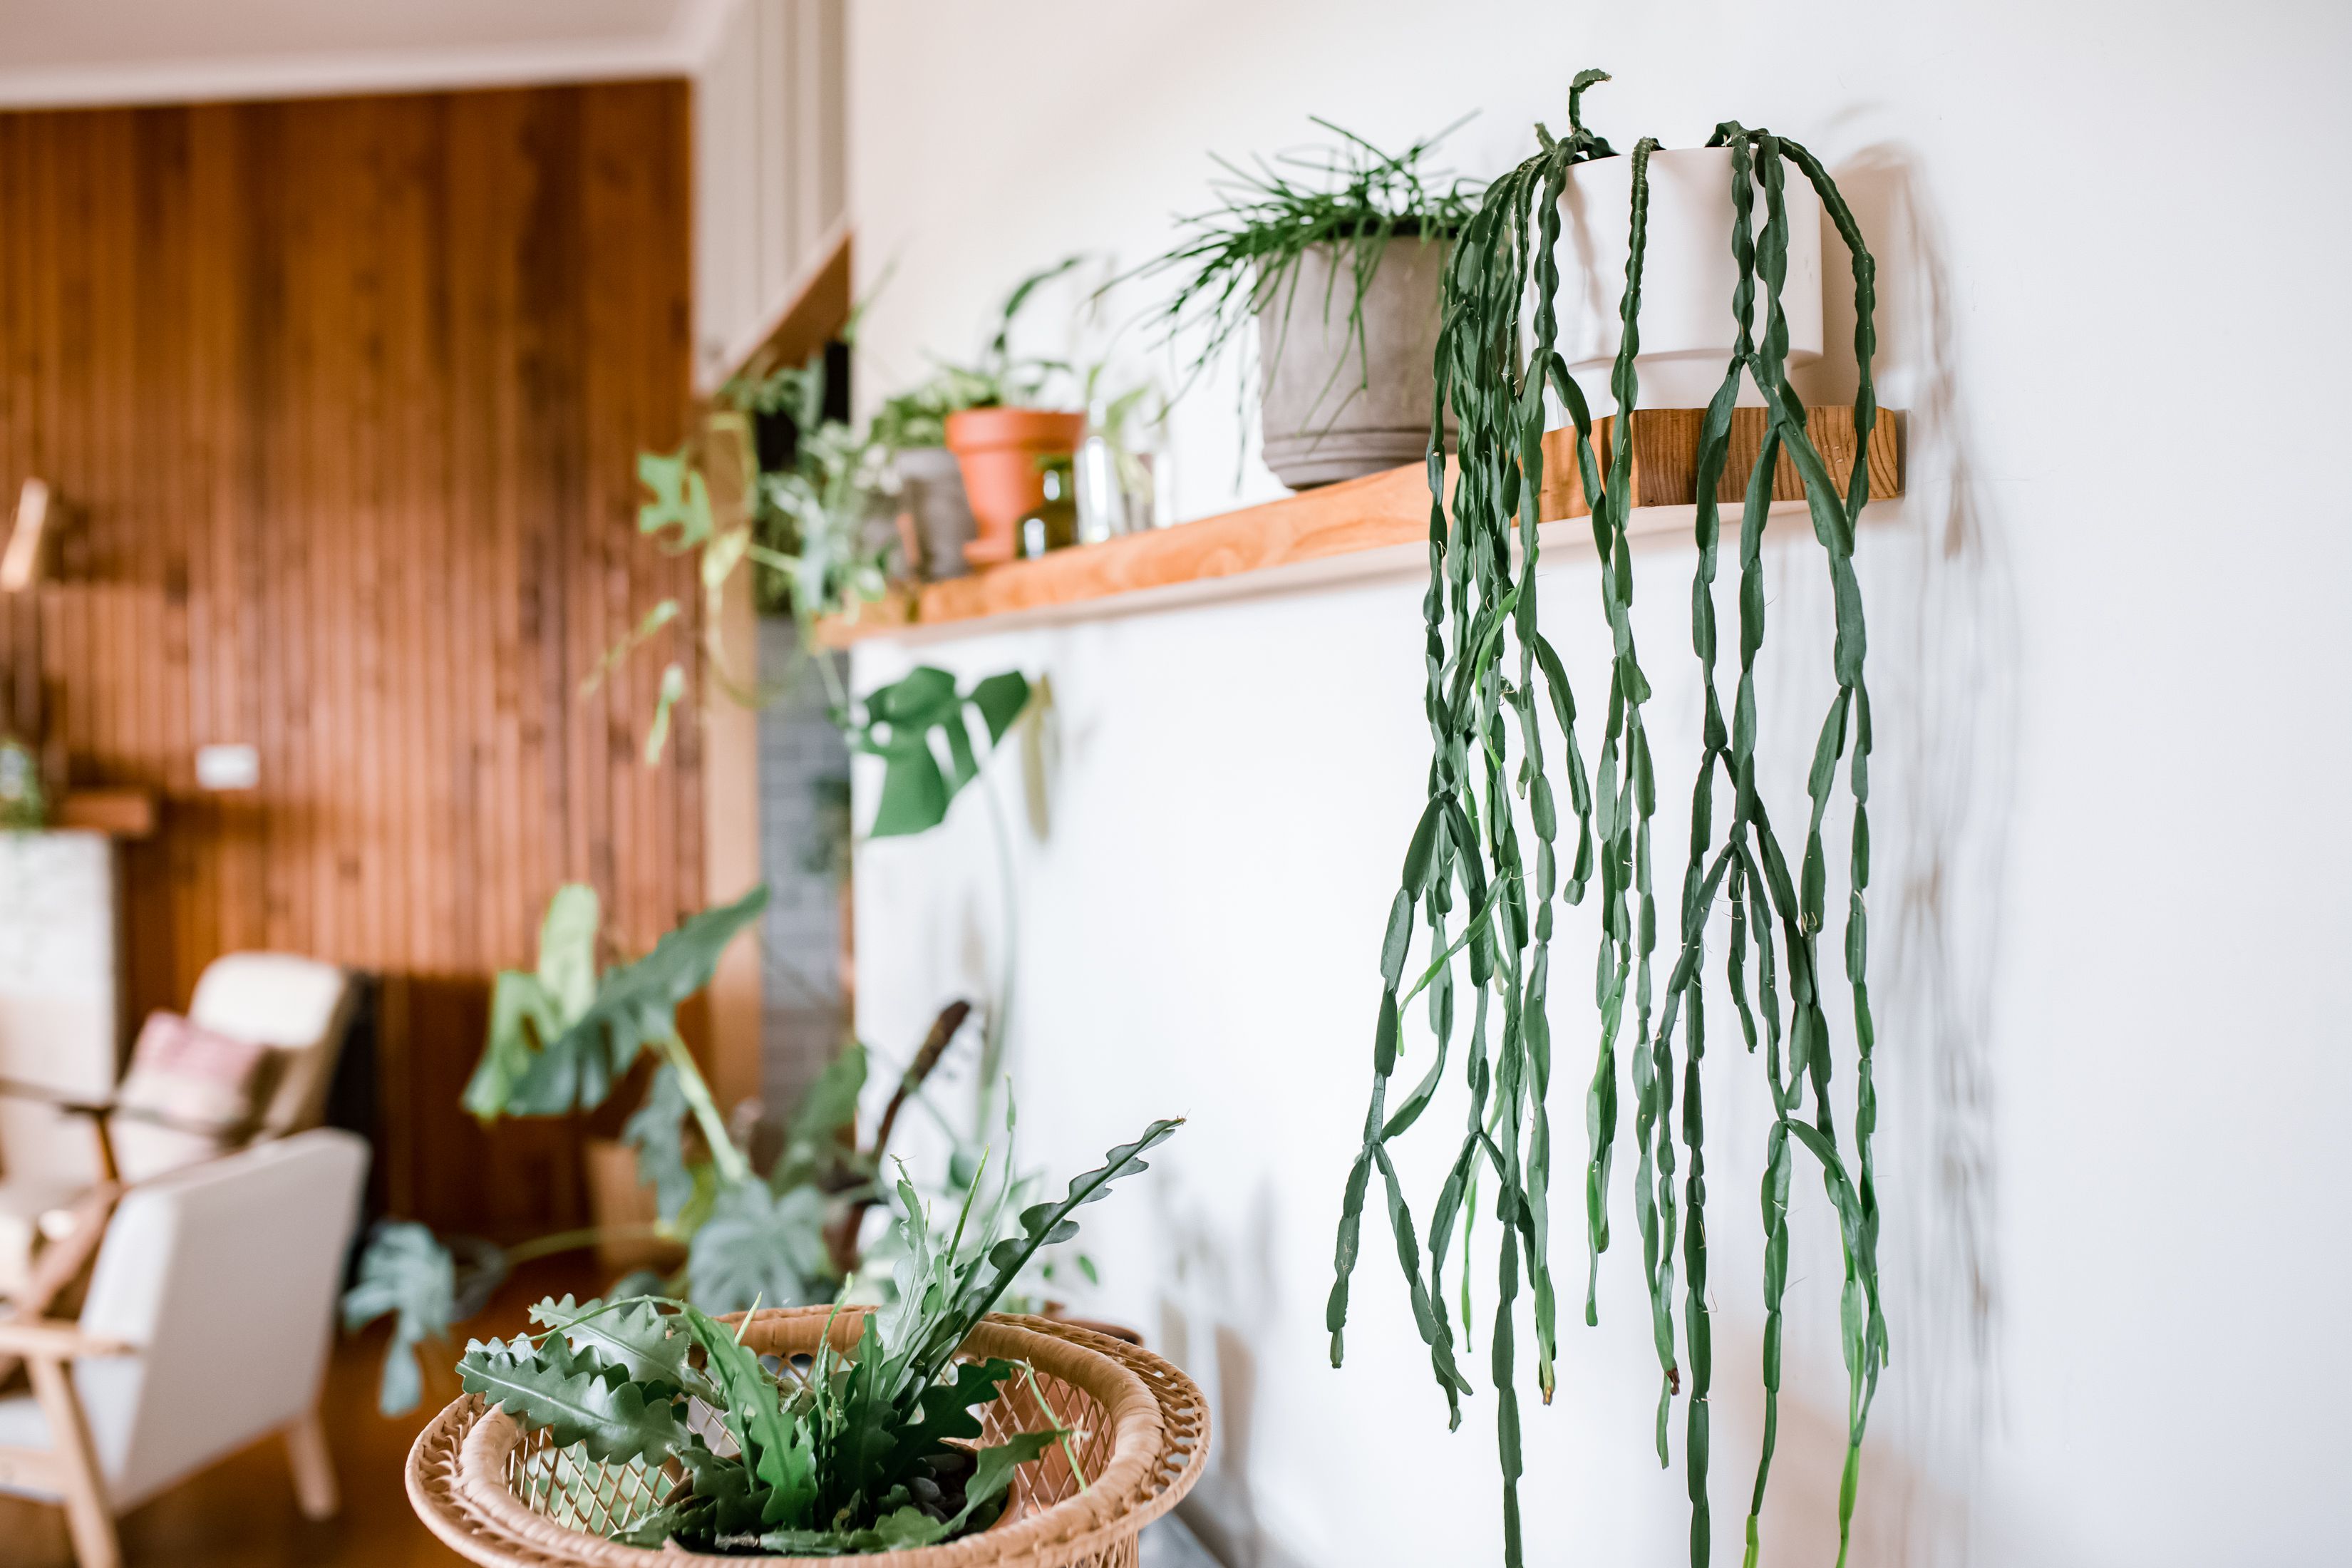 Our Favorite Houseplants That Will Fit and Thrive on a Shelf